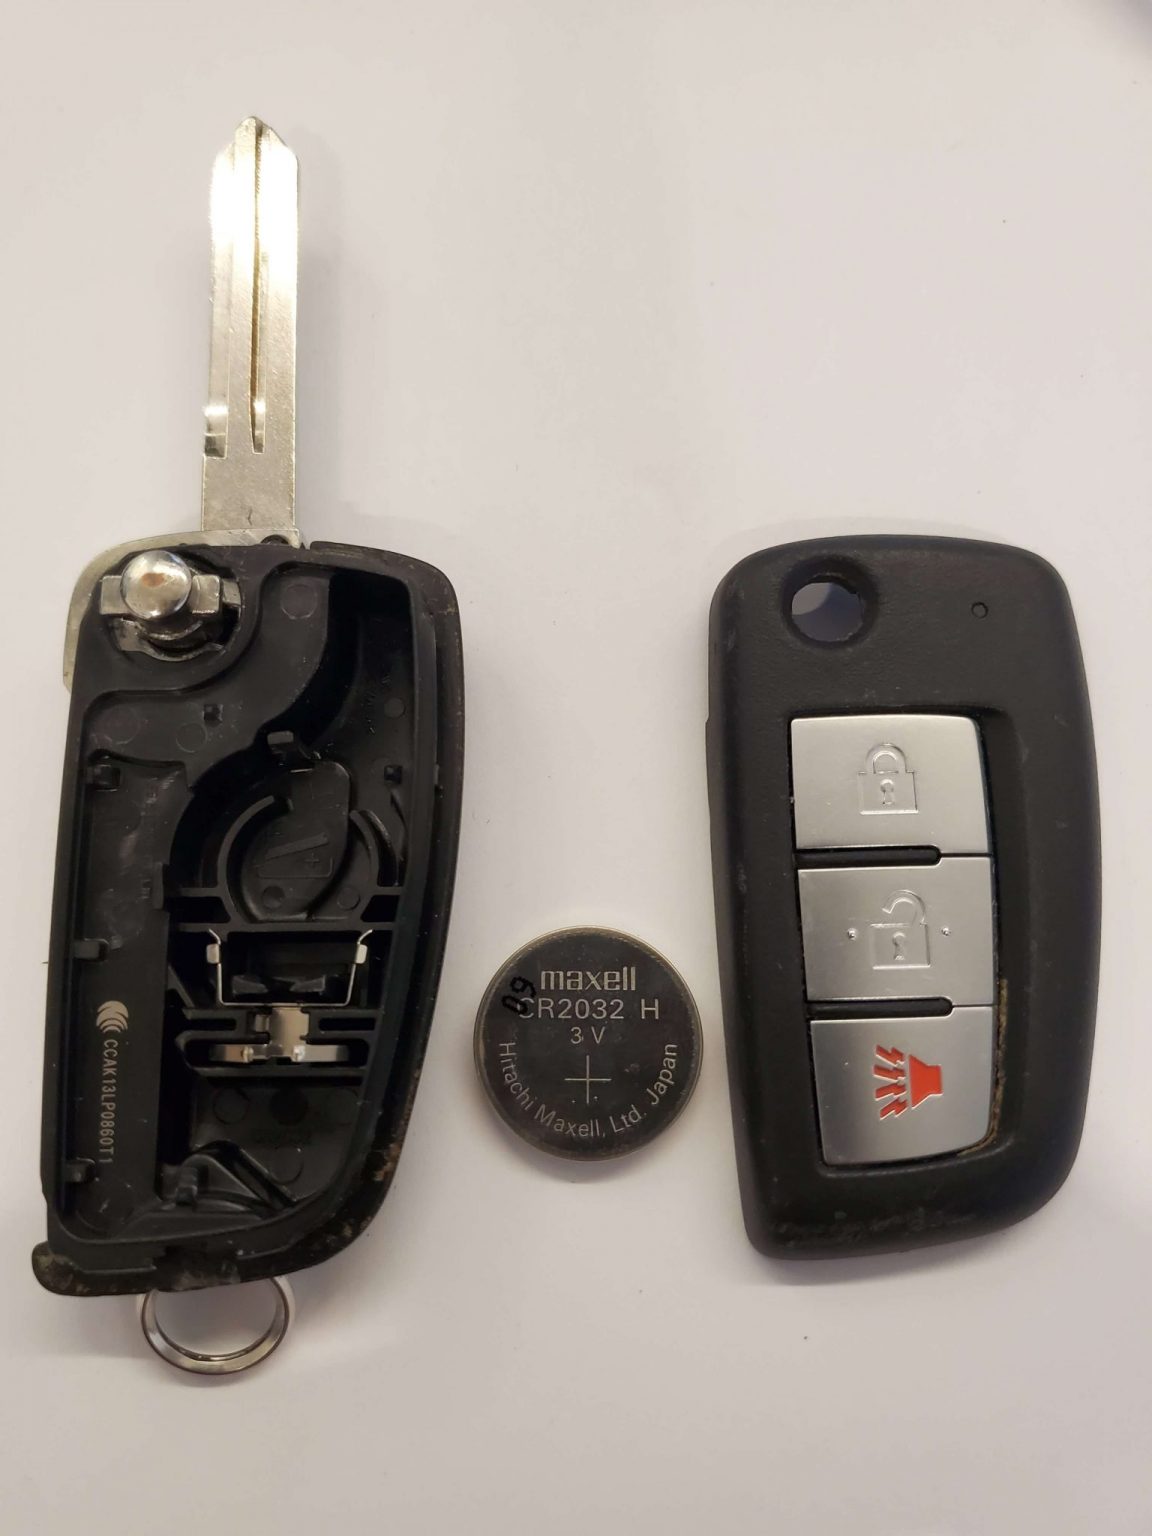 Nissan Rogue Key Replacement What To Do, Options, Costs & More